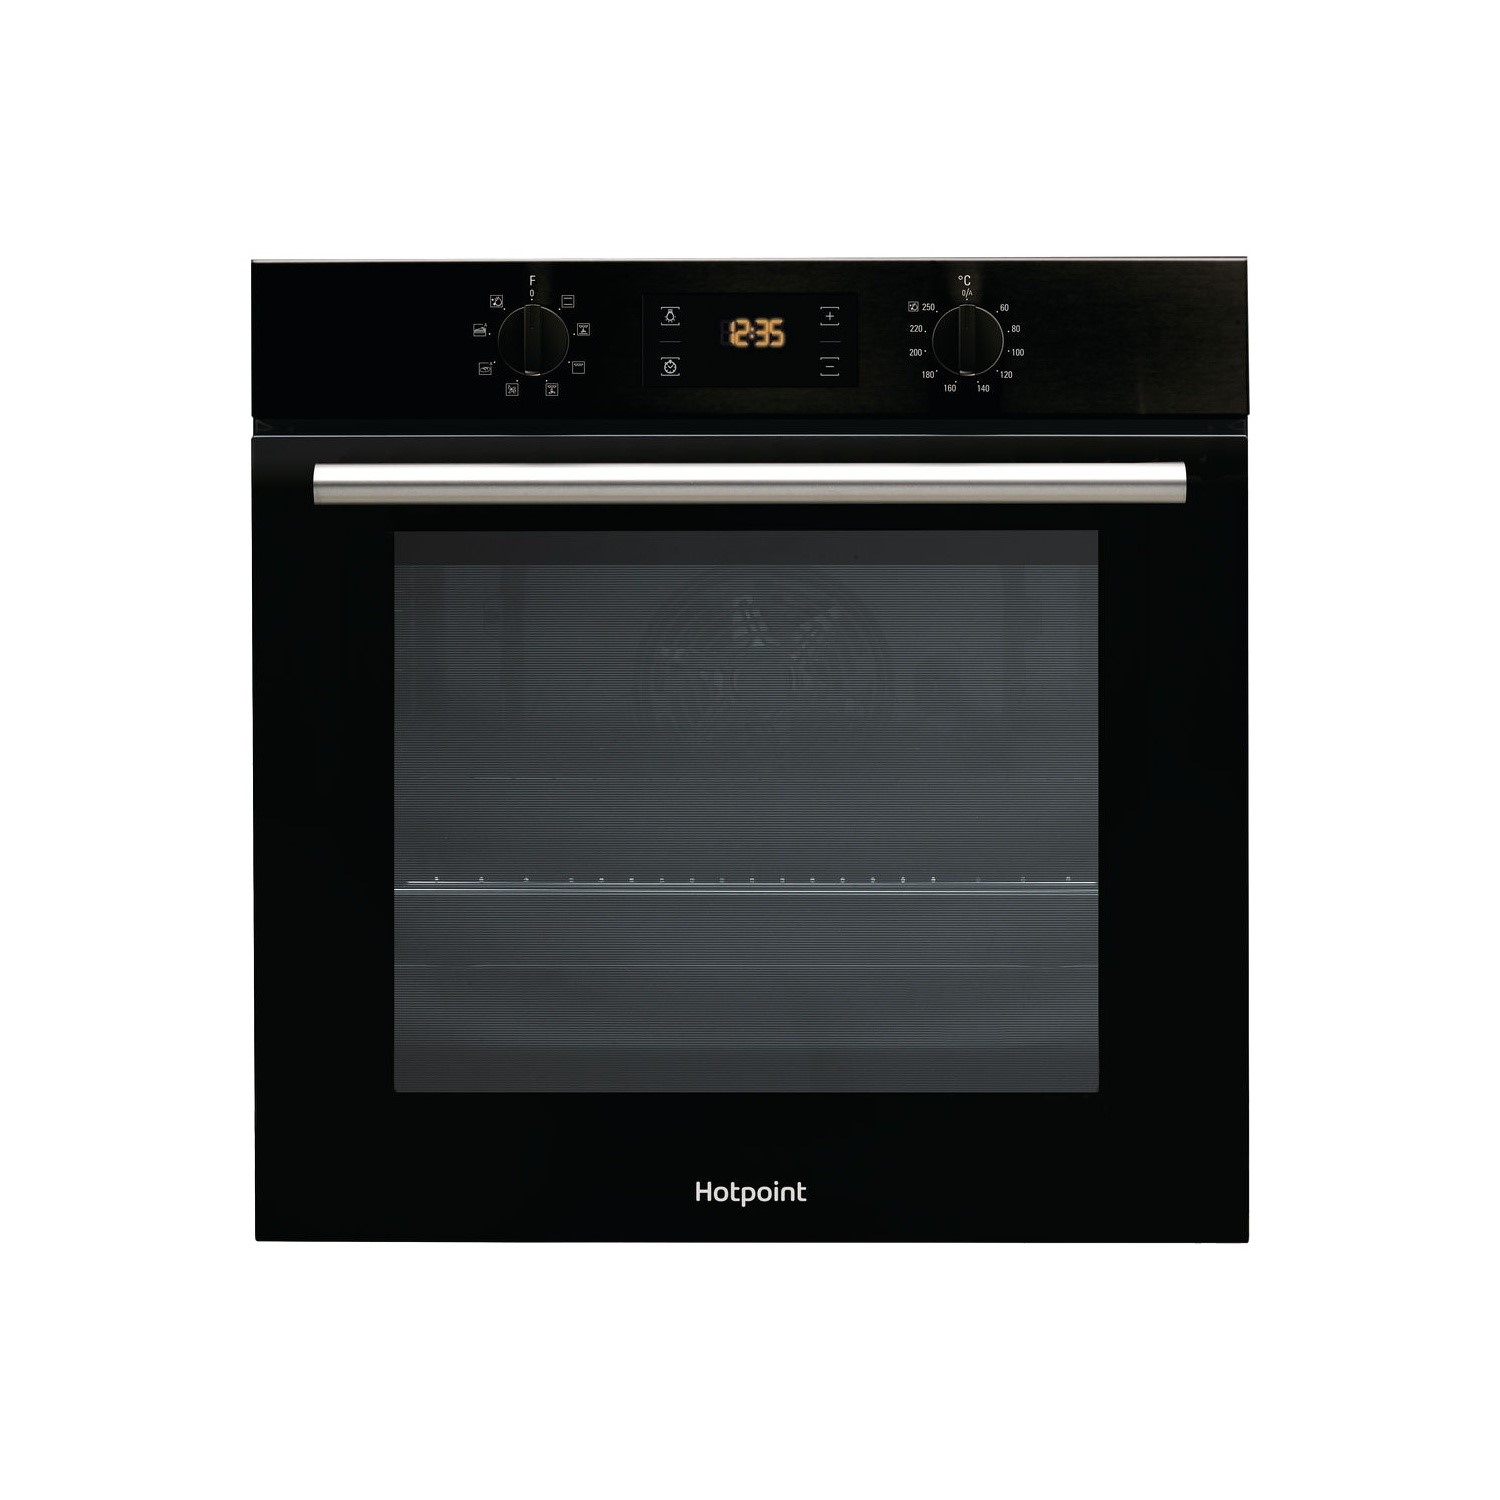 Refurbished Hotpoint SA2540HBL 60cm Single Built In Electric Oven